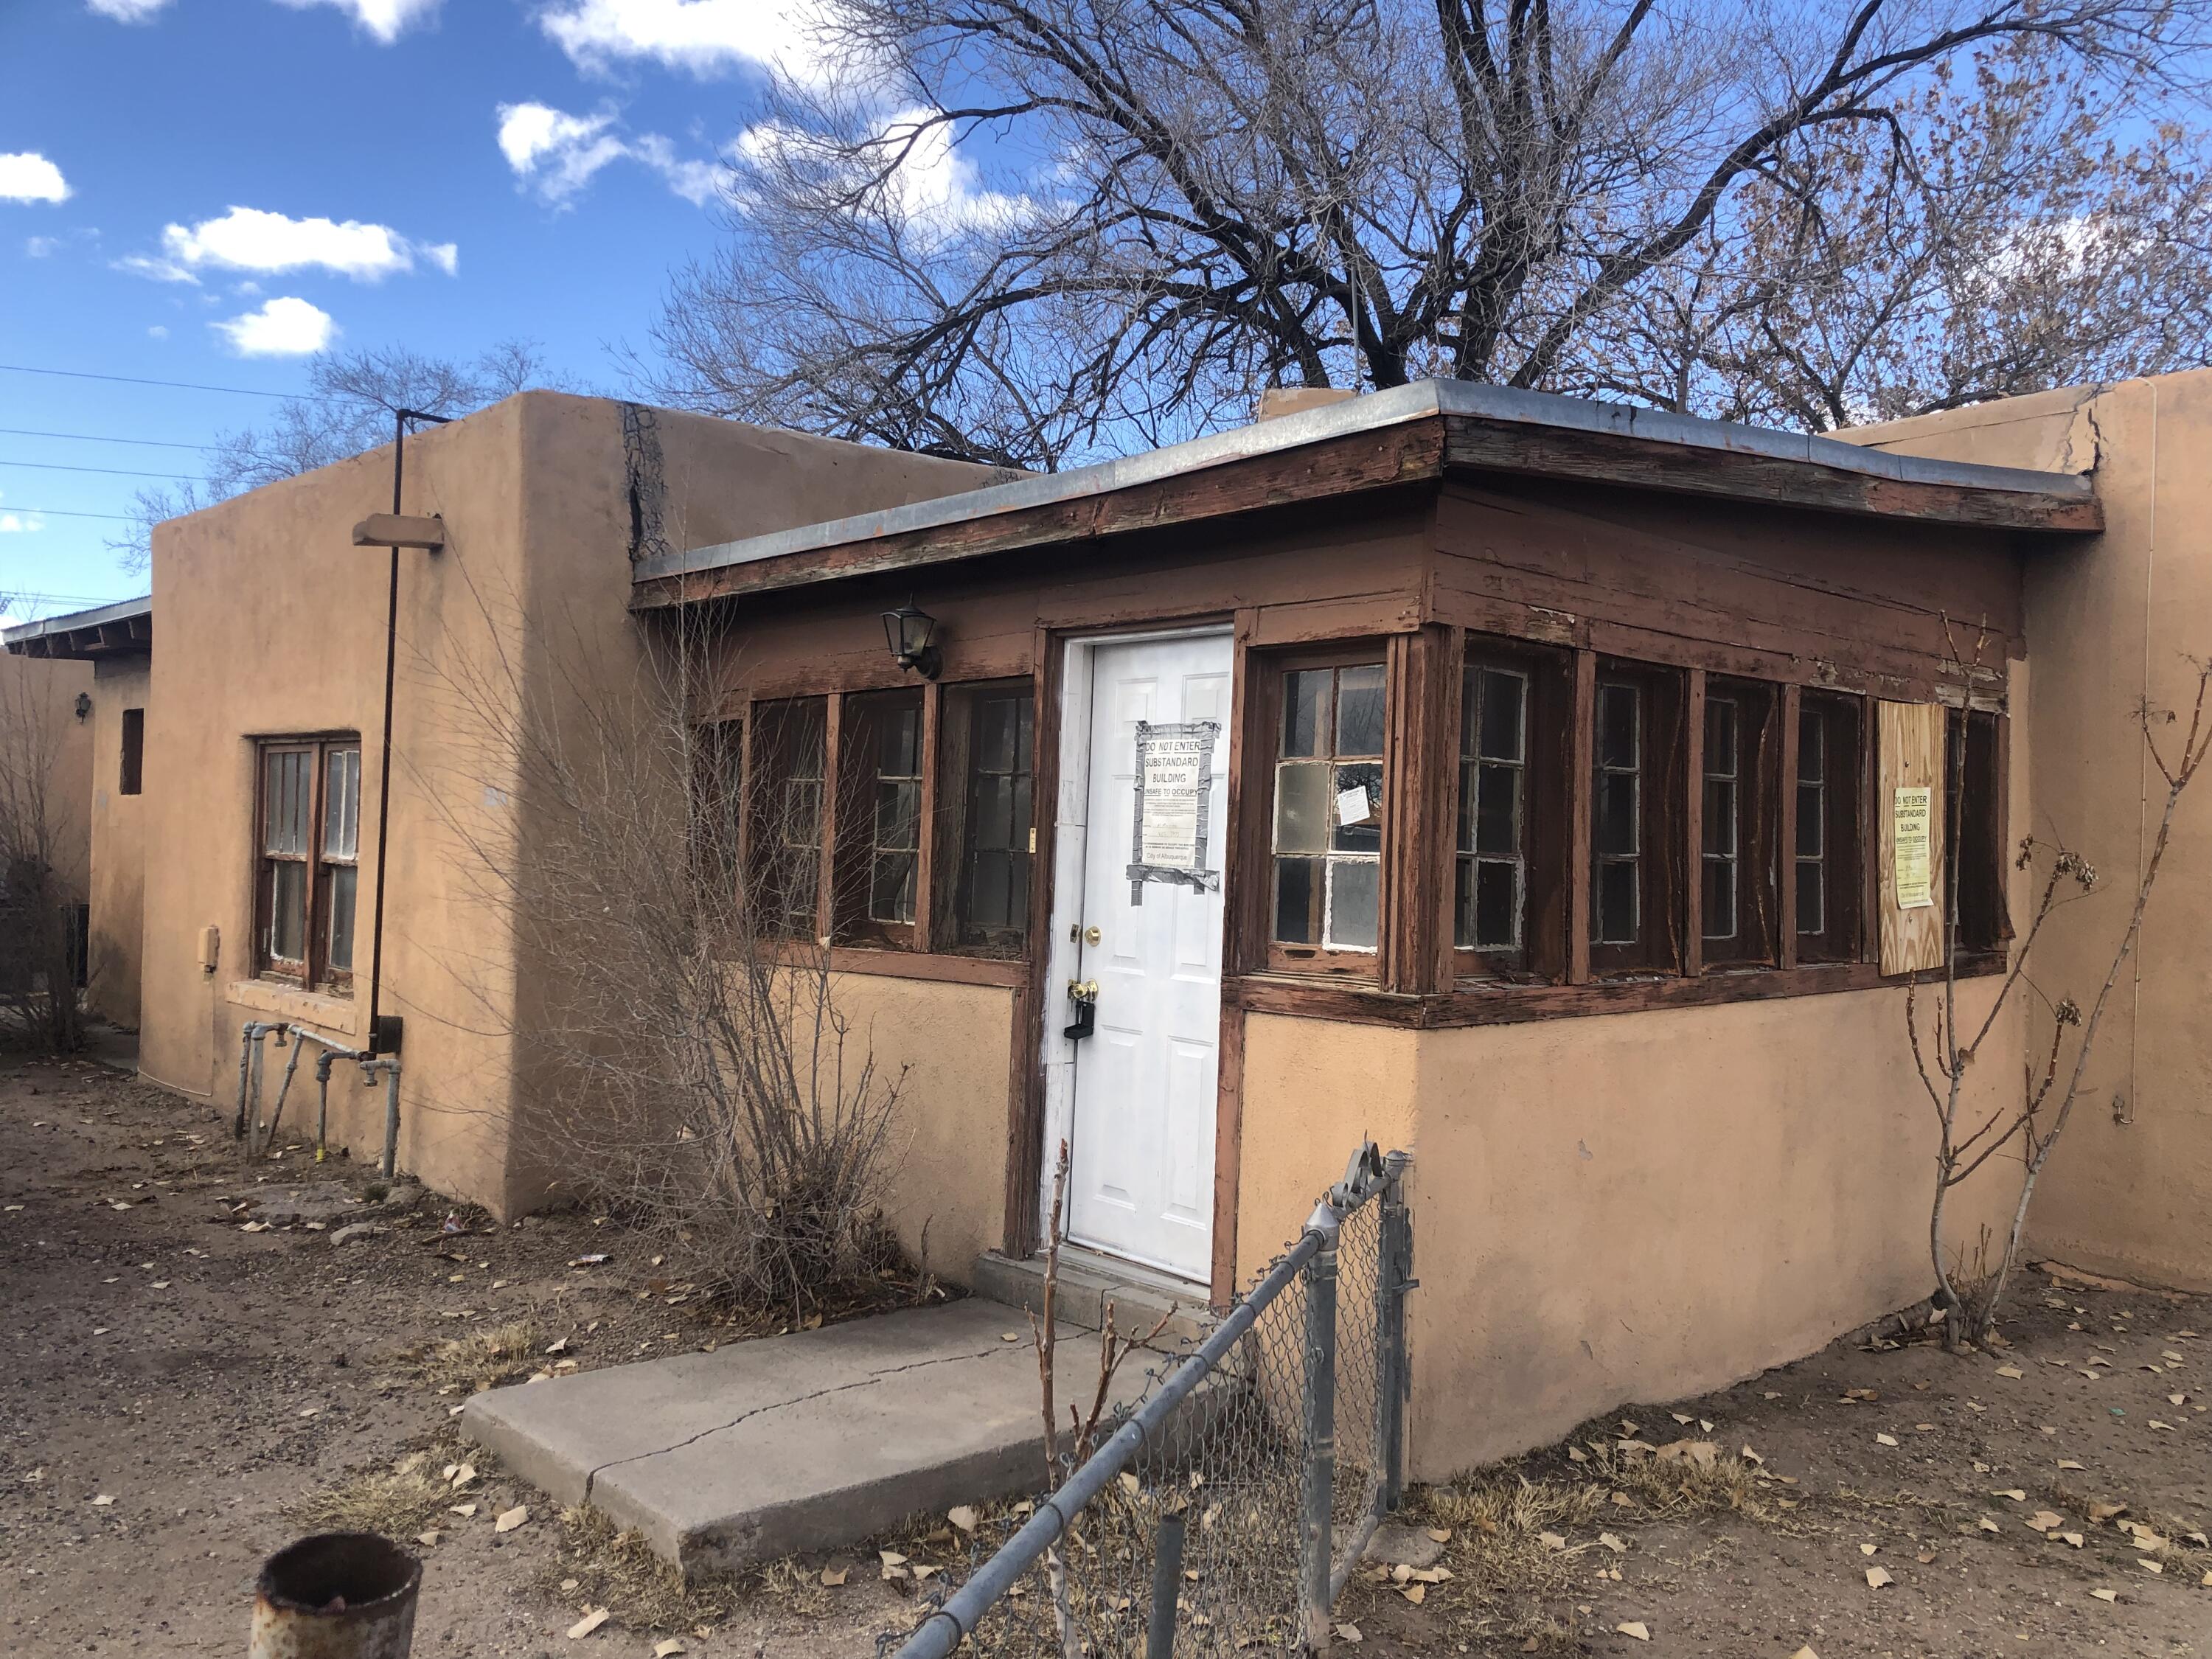 This pueblo style home is located on a quiet street.  Near Old Town Plaza, parks, restaurants, and shopping.  1-2 bedroom unit with 1 bath.  Bring your contractor buyers to renovate this property. The structure has a substandard notice attached to the property.  This property was divided into 3 parts by the prior owner.  The subject unit is the front unit.  The driveway is the easement.